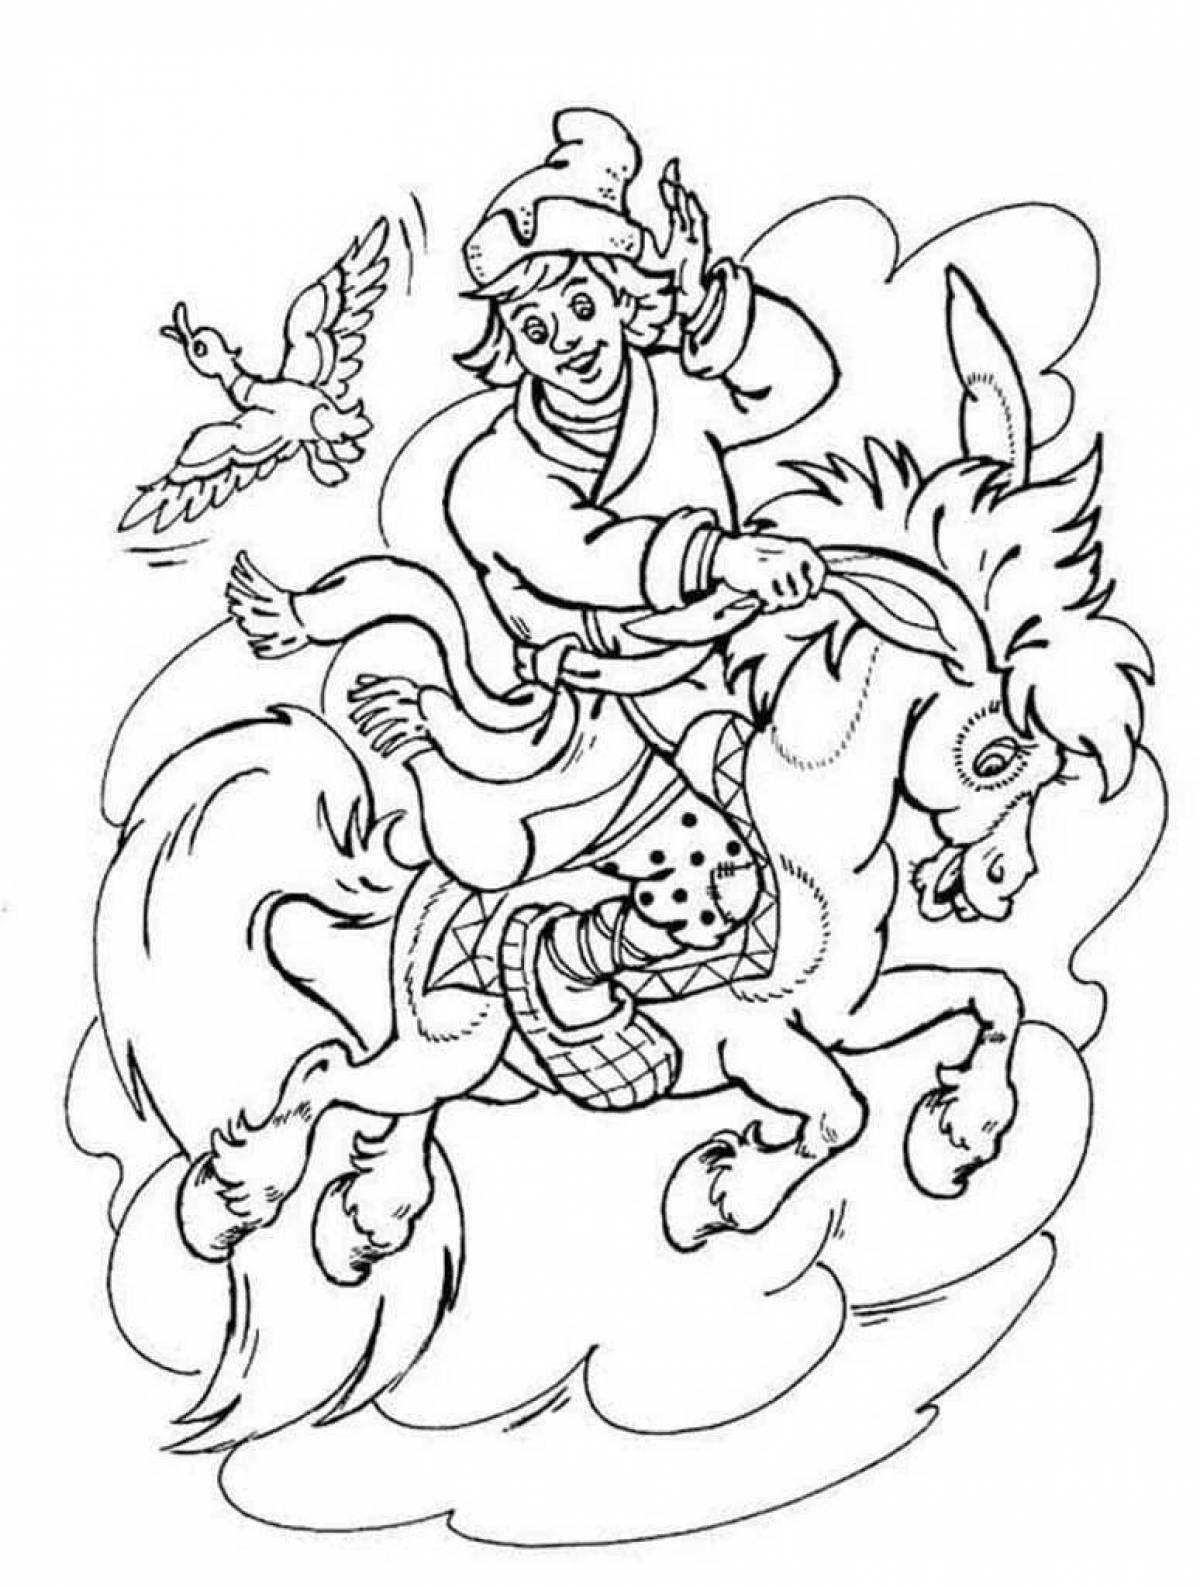 Coloring page captivating little humpbacked horse